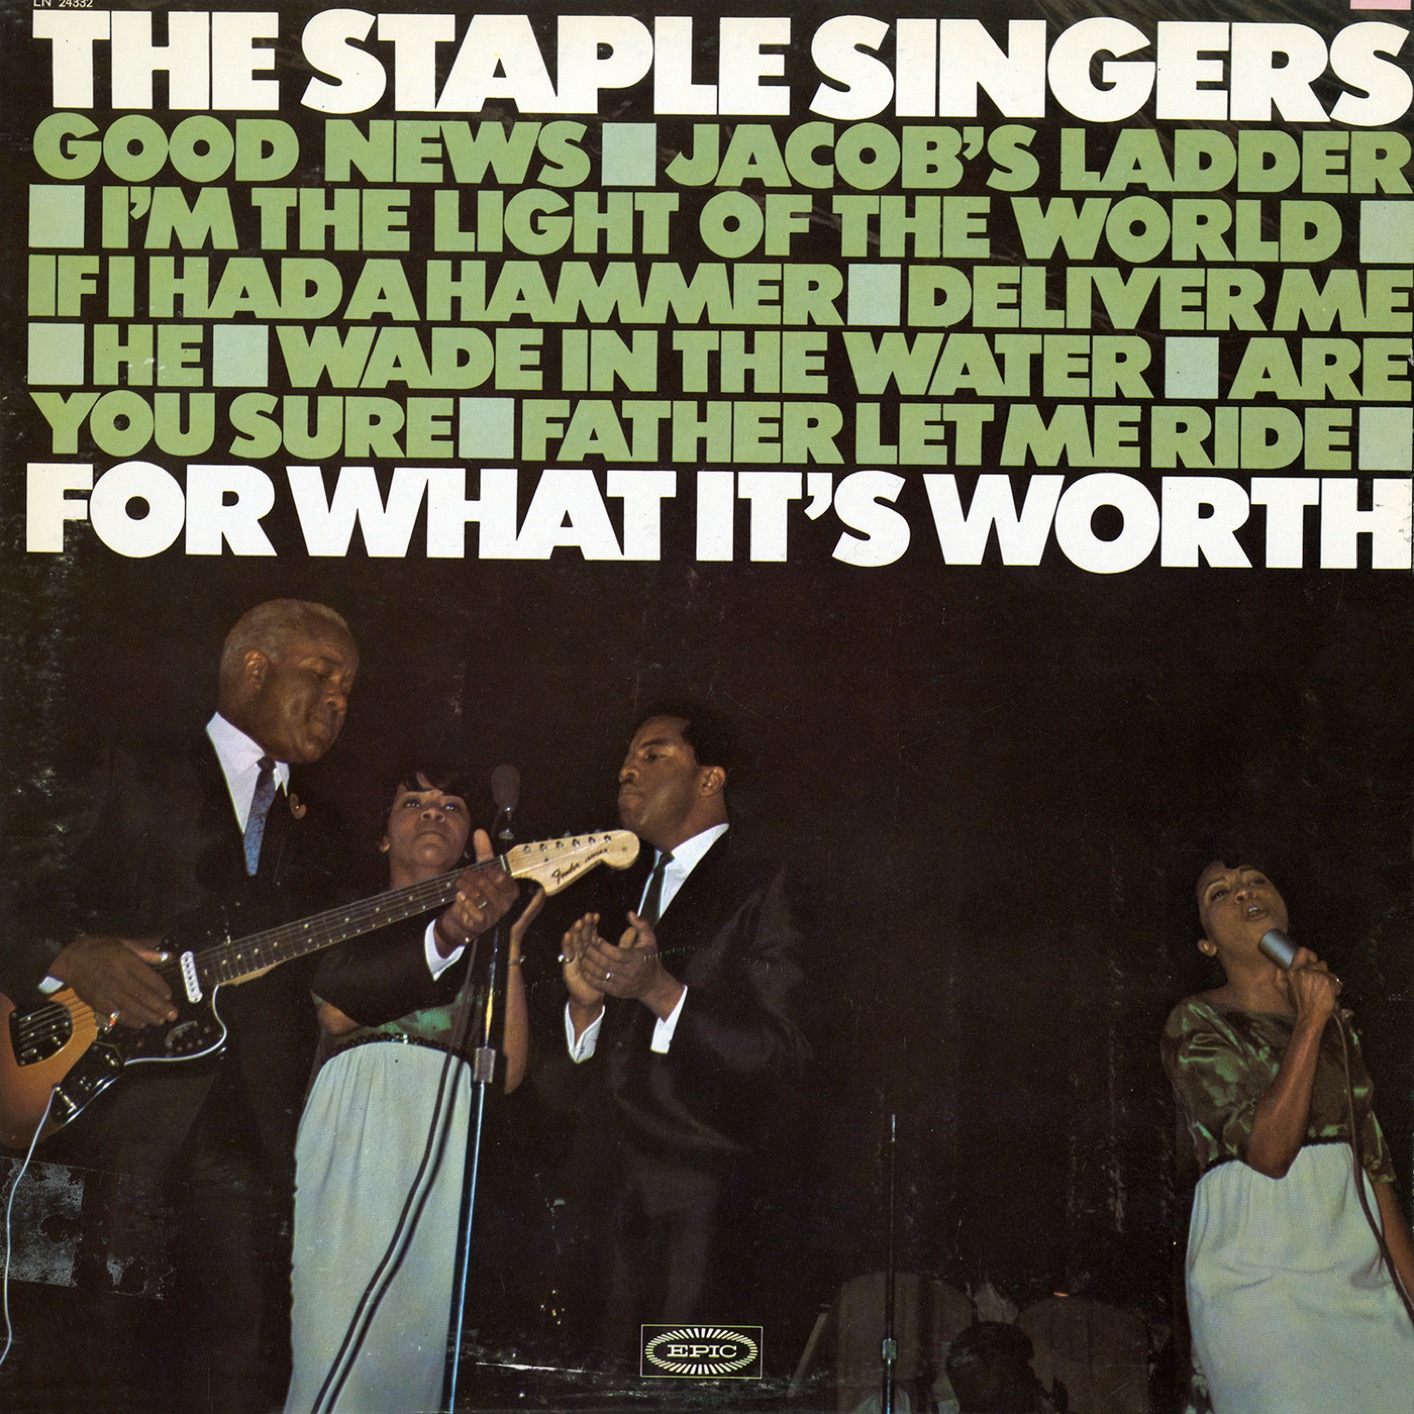 The Staple Singers - For What It’s Worth (1967/2017) [FLAC 24bit/96kHz]